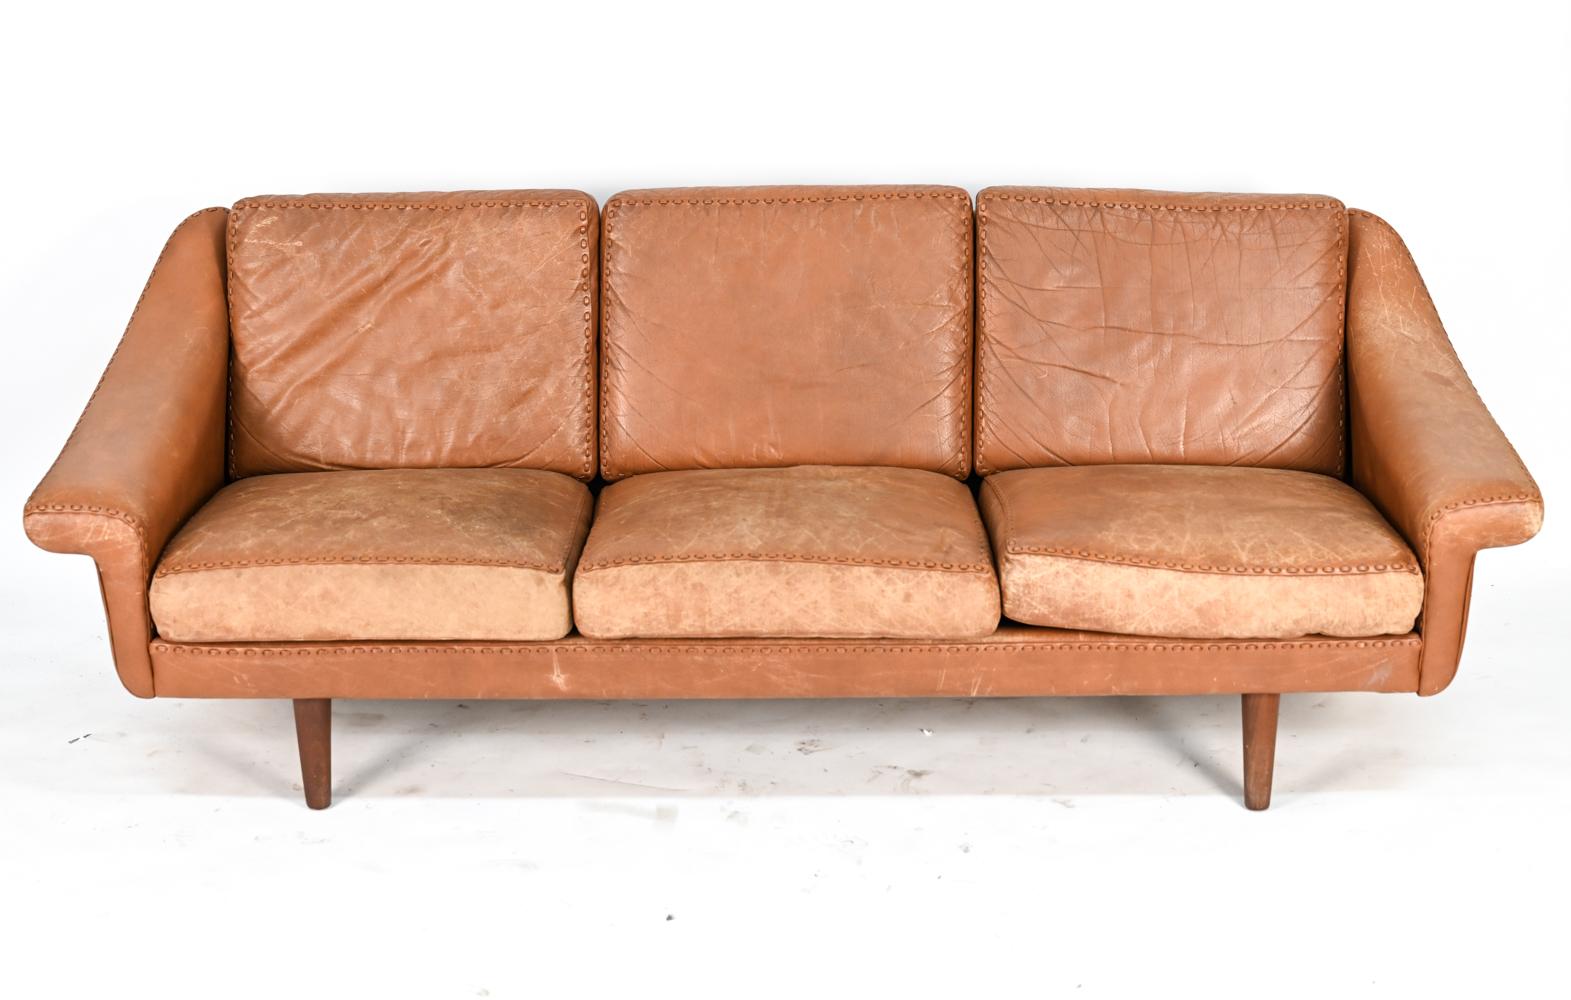 A Danish mid-century three-seater sofa upholstered in handsomely patinated cognac leather with interesting leather stitch detail, De Sede Style. 